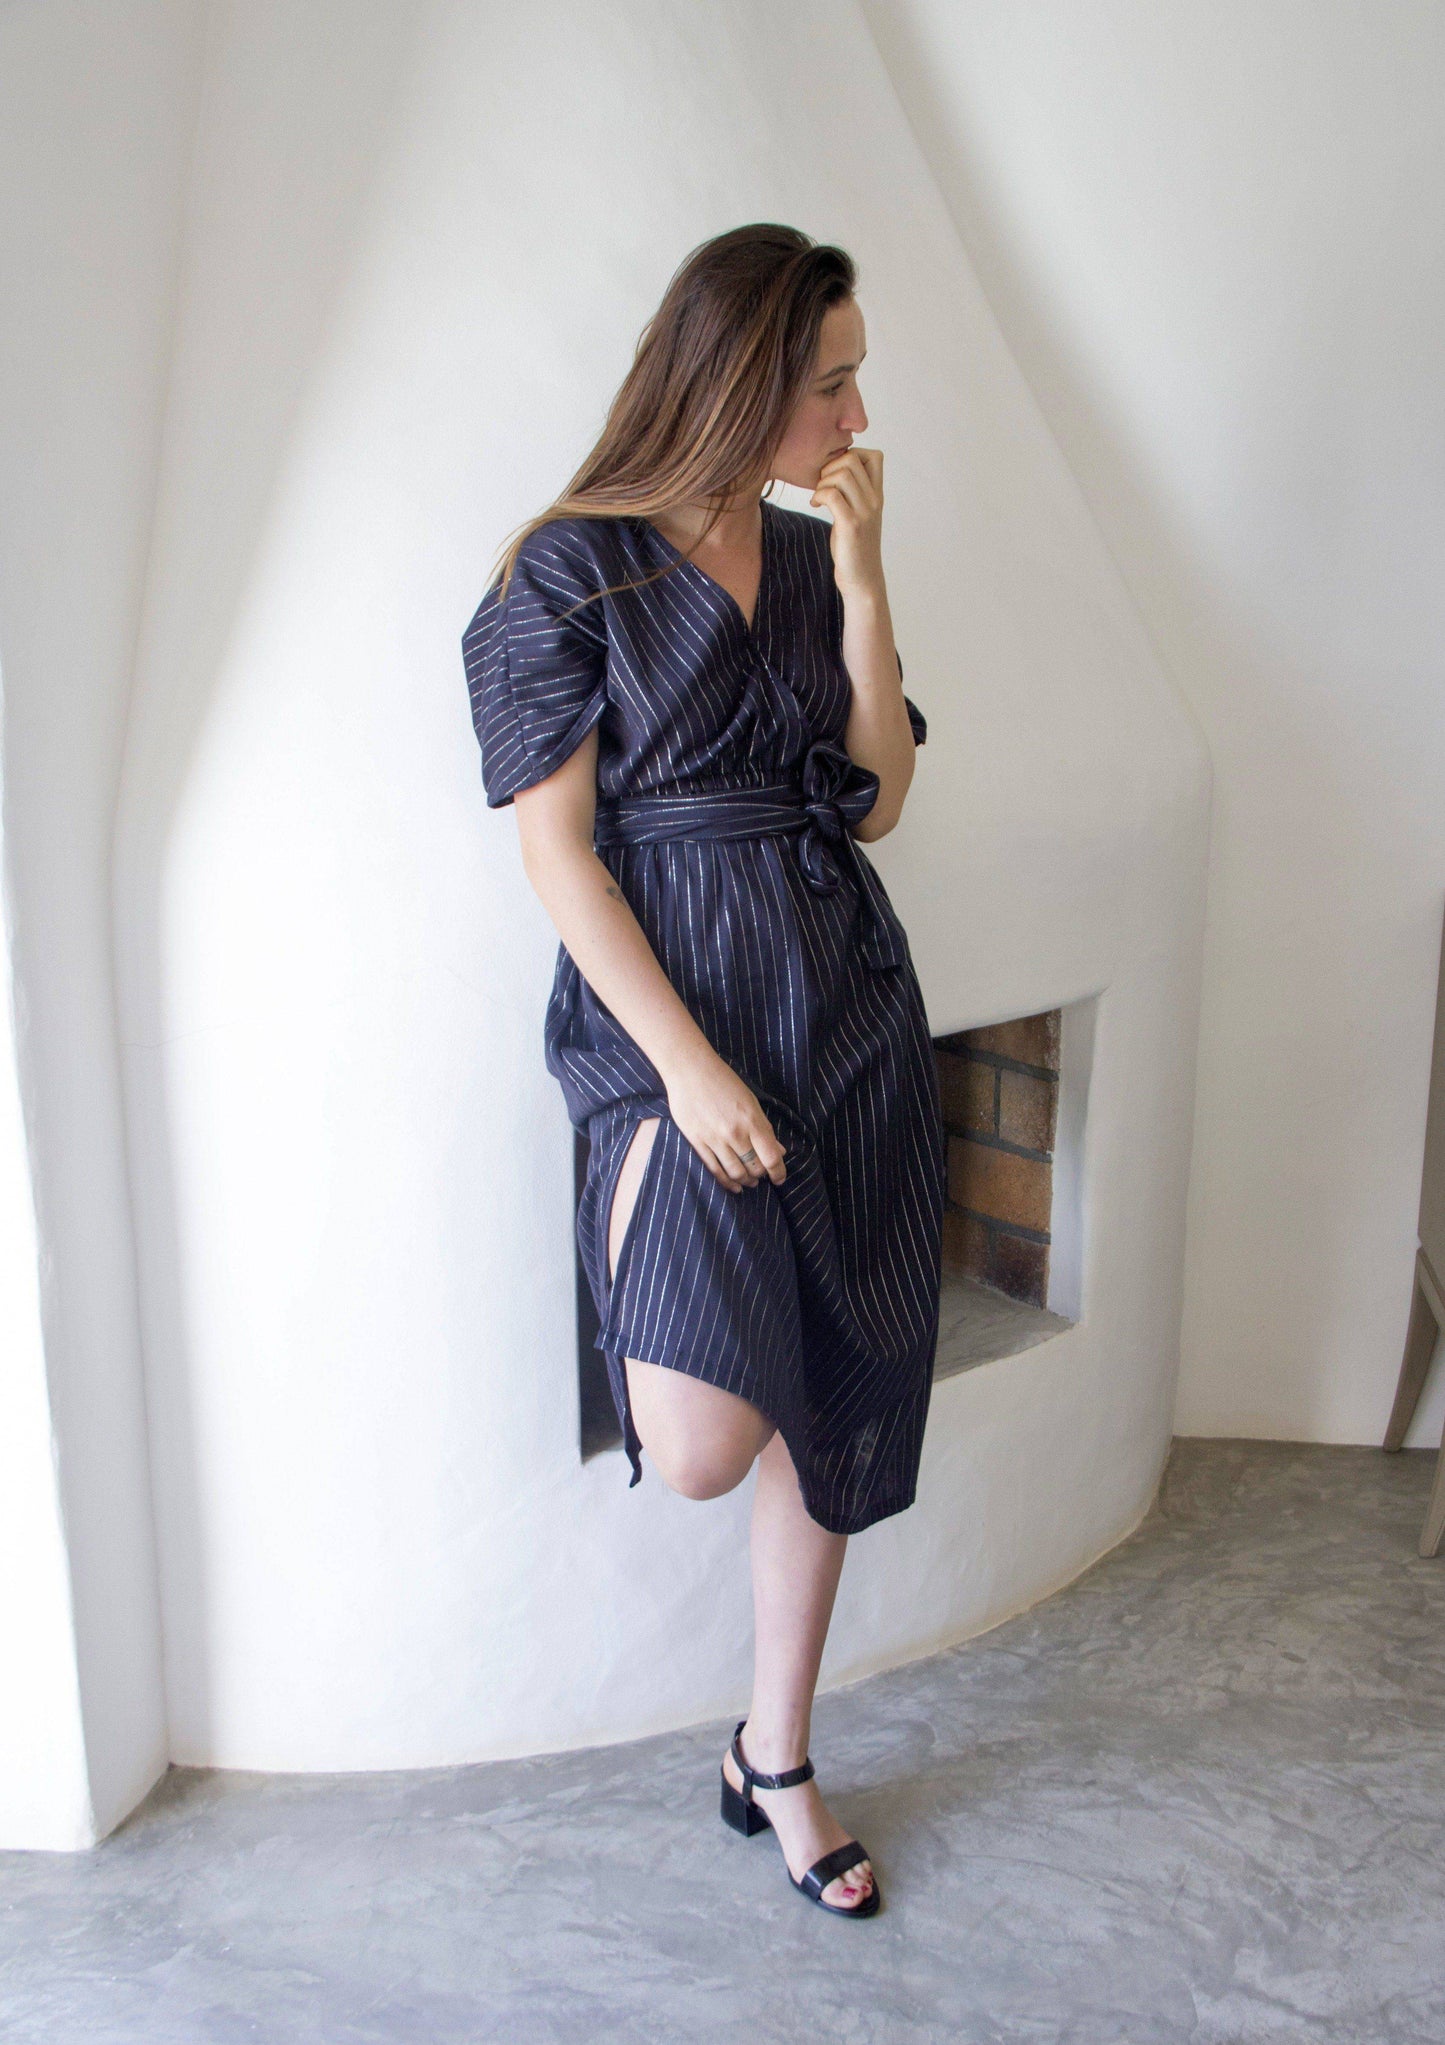 DELPHINE DRESS •  maxi dress gently cinched at the waist for a feminine fit featuring a wrap-around belt, open low v-neckline with wide short sleeves, and side slits in the skirt in a silver fleck pinstripe fabric. Available in one size.